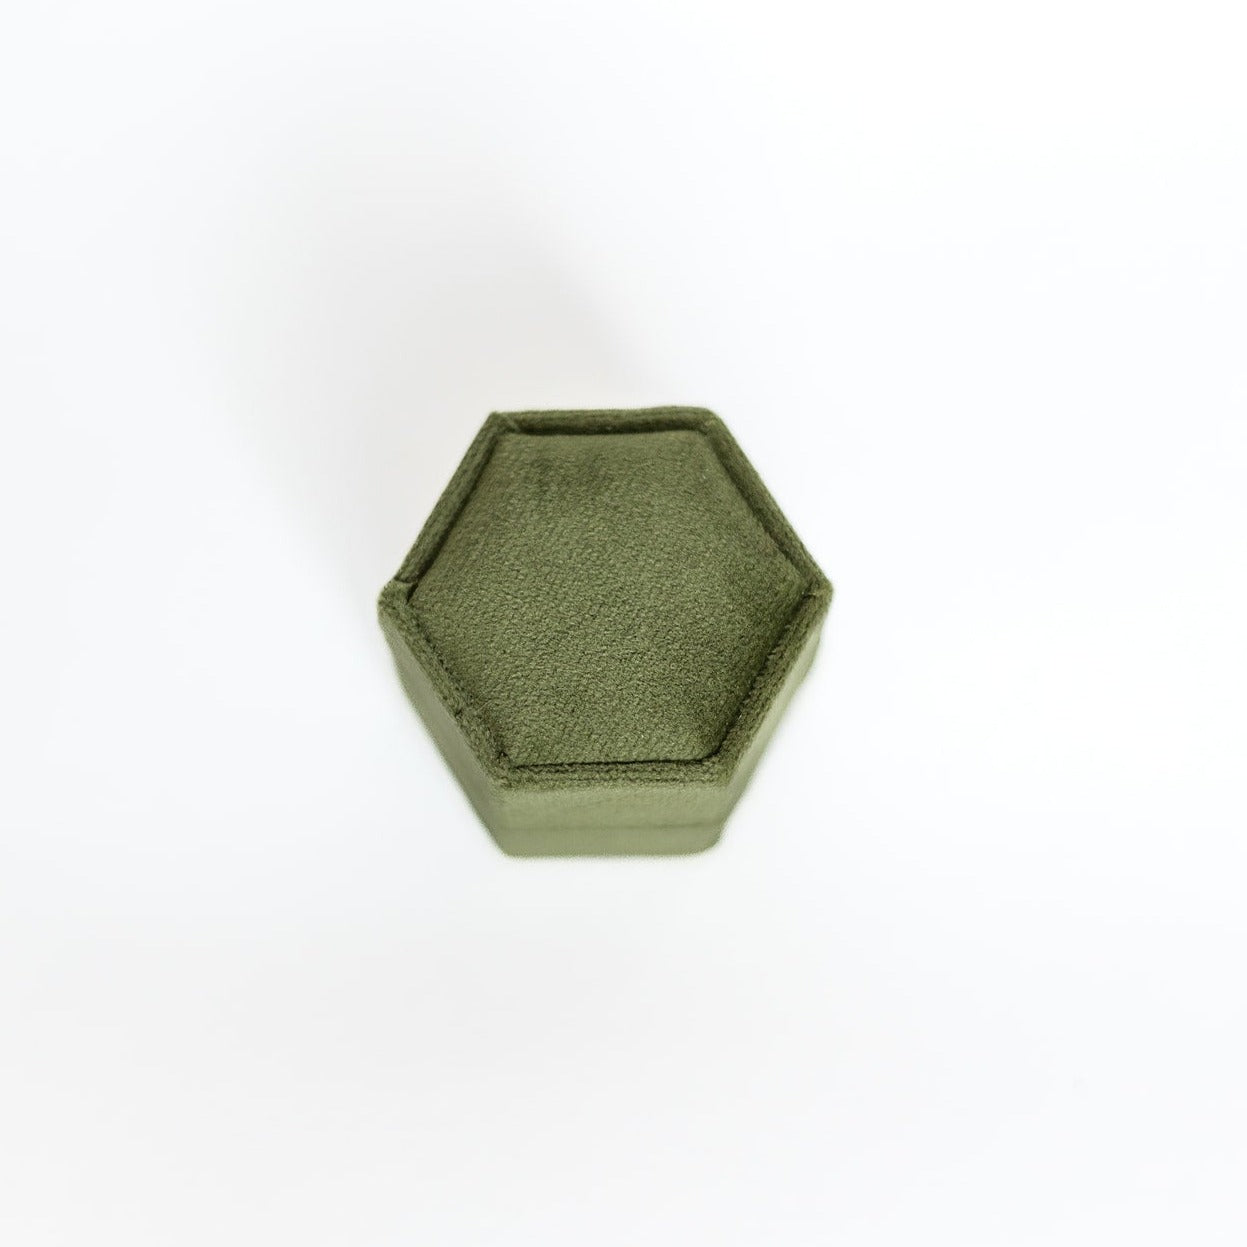 The outside of an olive-coloured hexagon ring box.